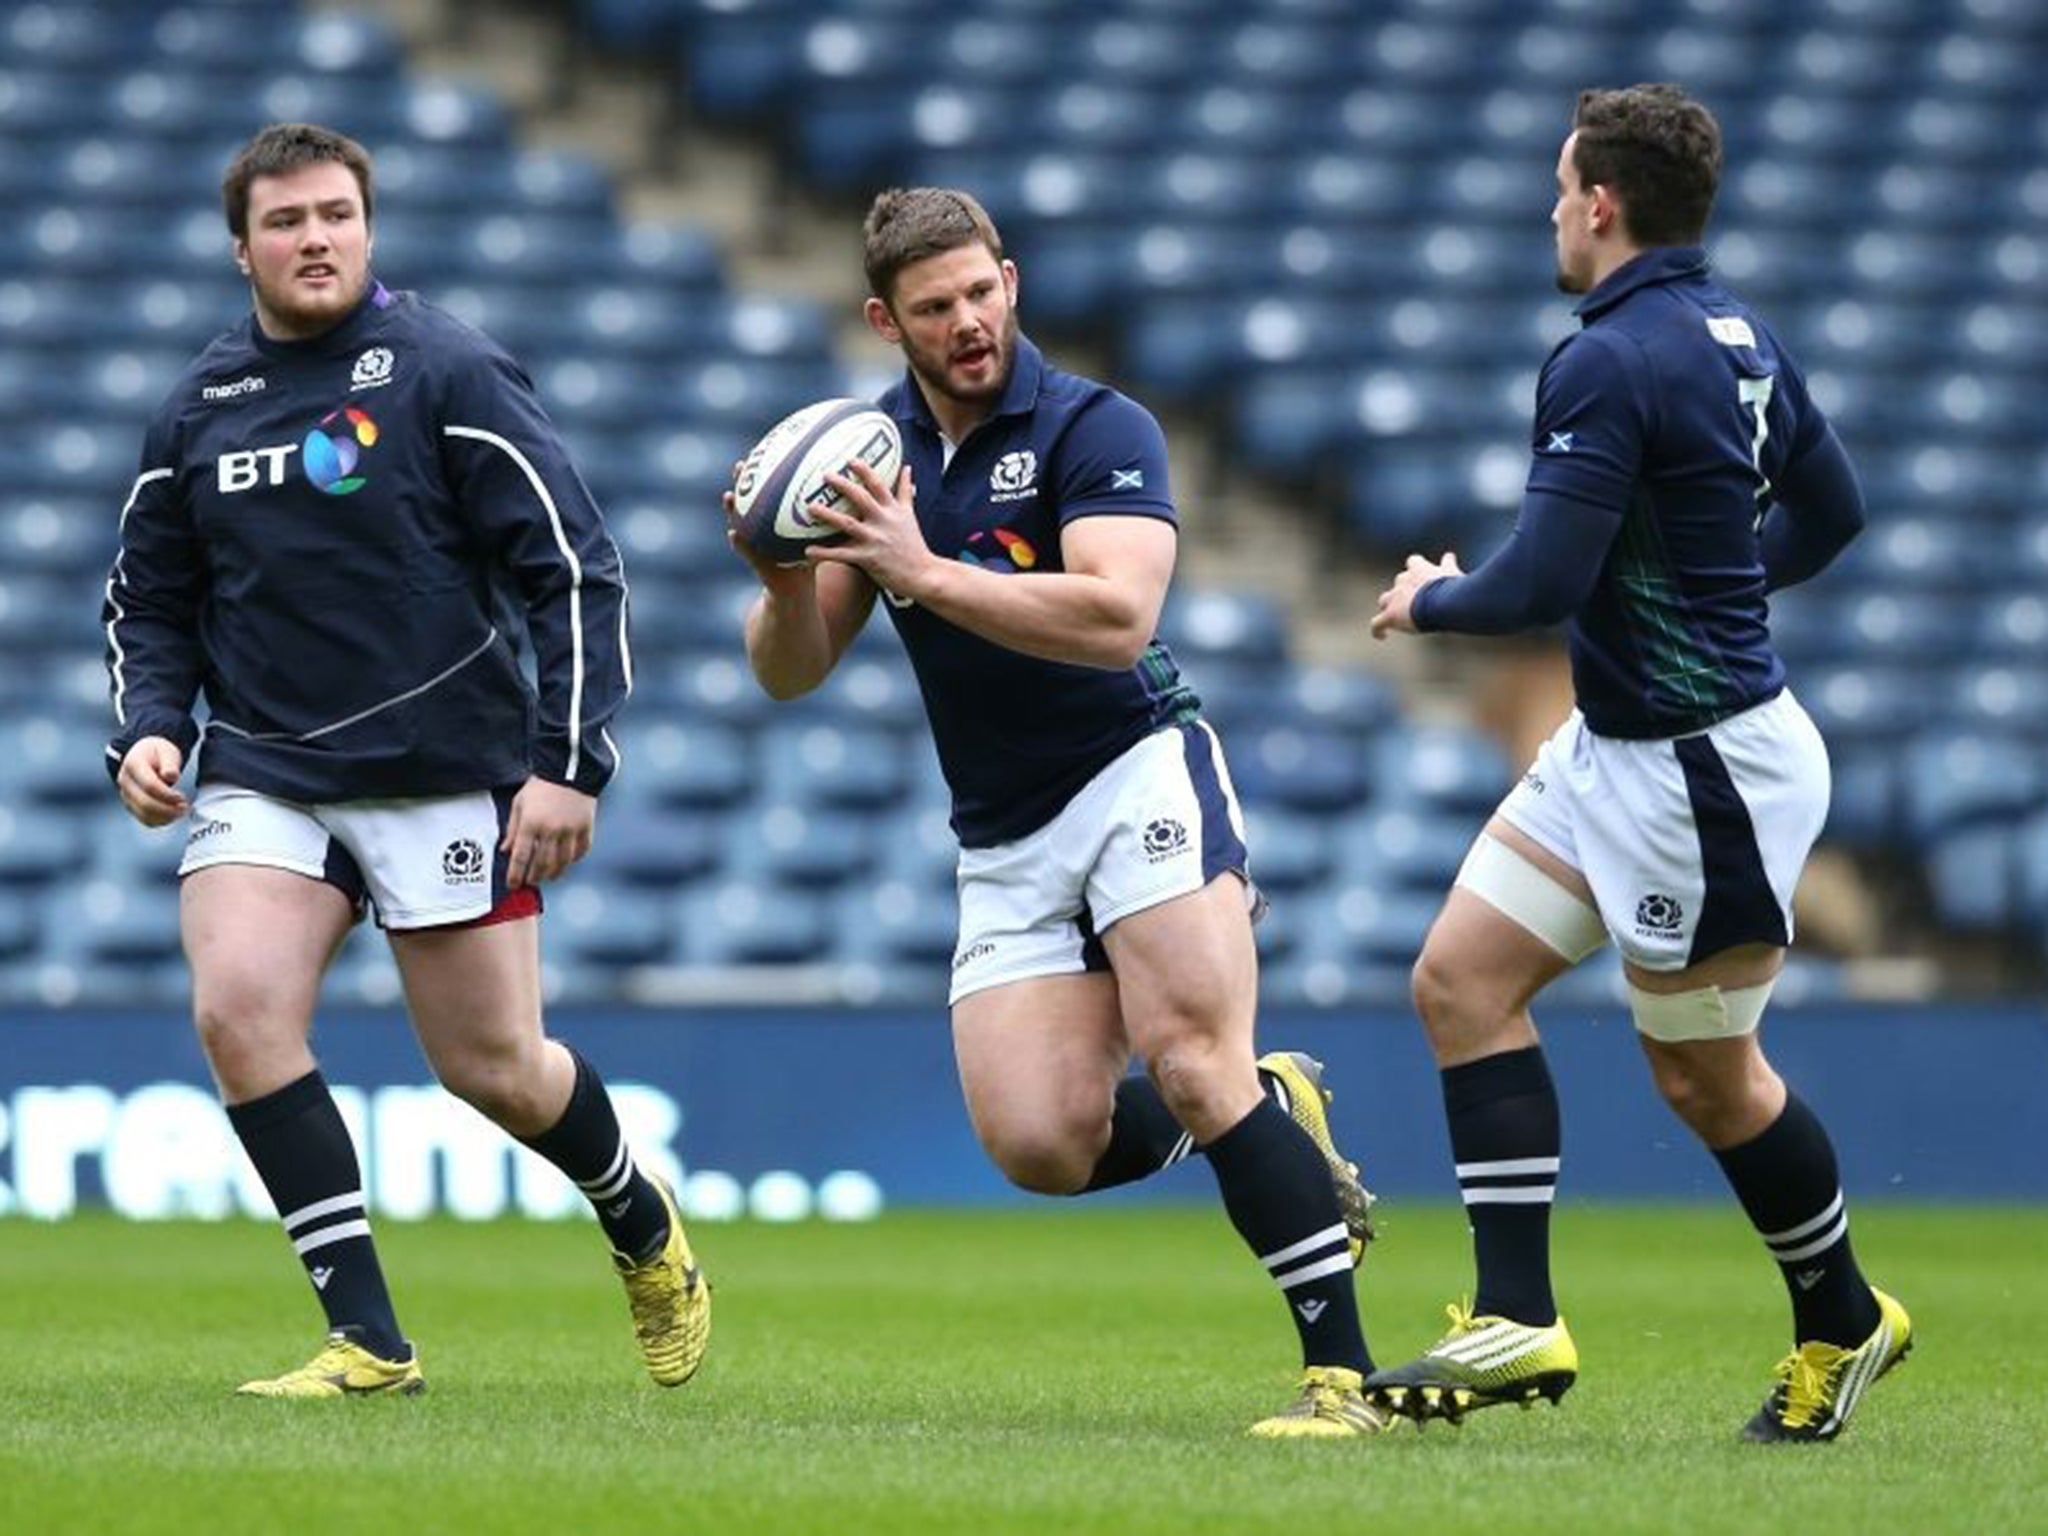 ‘We will use last season’s Ireland game a little bit for motivation,’ said Scotland hooker Ross Ford